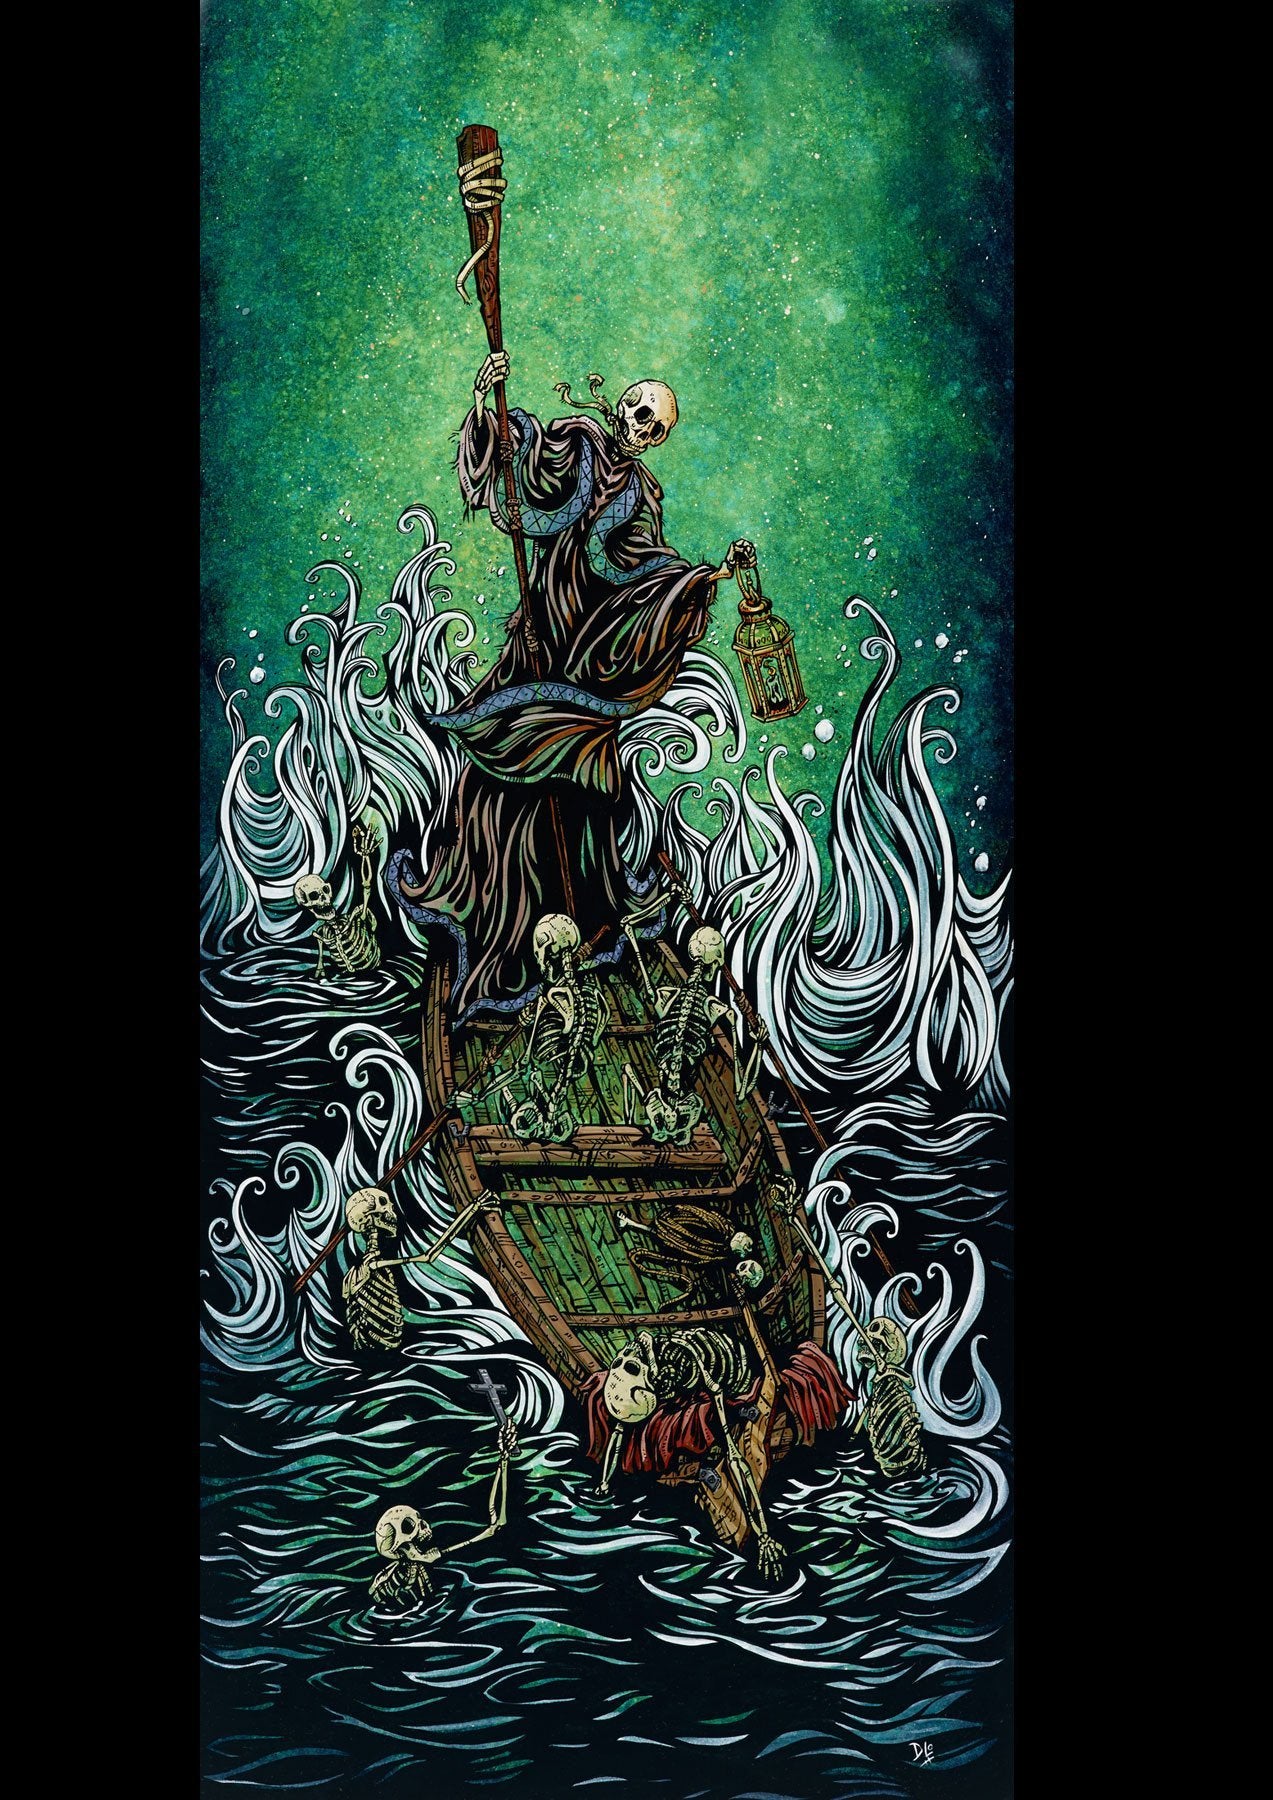 The Boatman on the River Styx by Day of the Dead Artist David Lozeau, Day of the Dead Art, Dia de los Muertos Art, Dia de los Muertos Artist